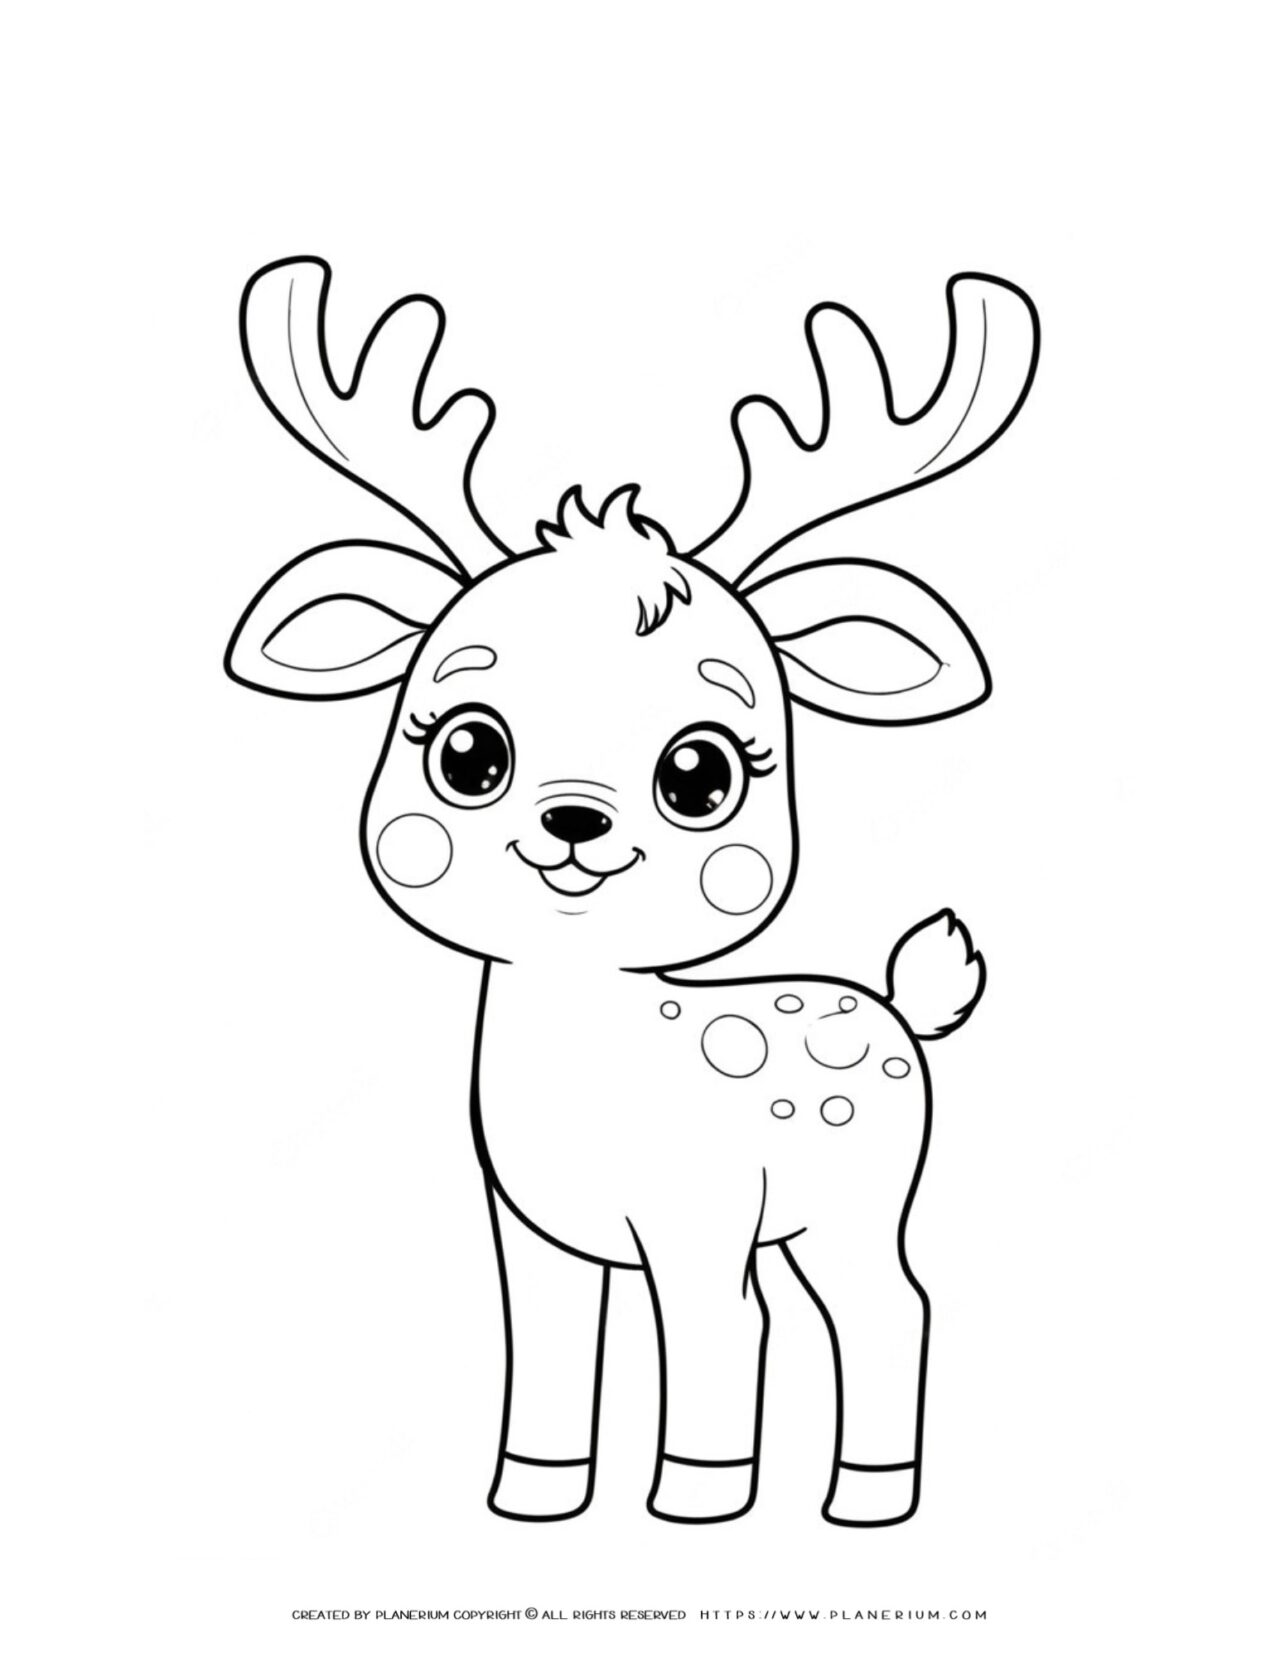 cute-happy-reindeer-outline-coloring-page-for-kids